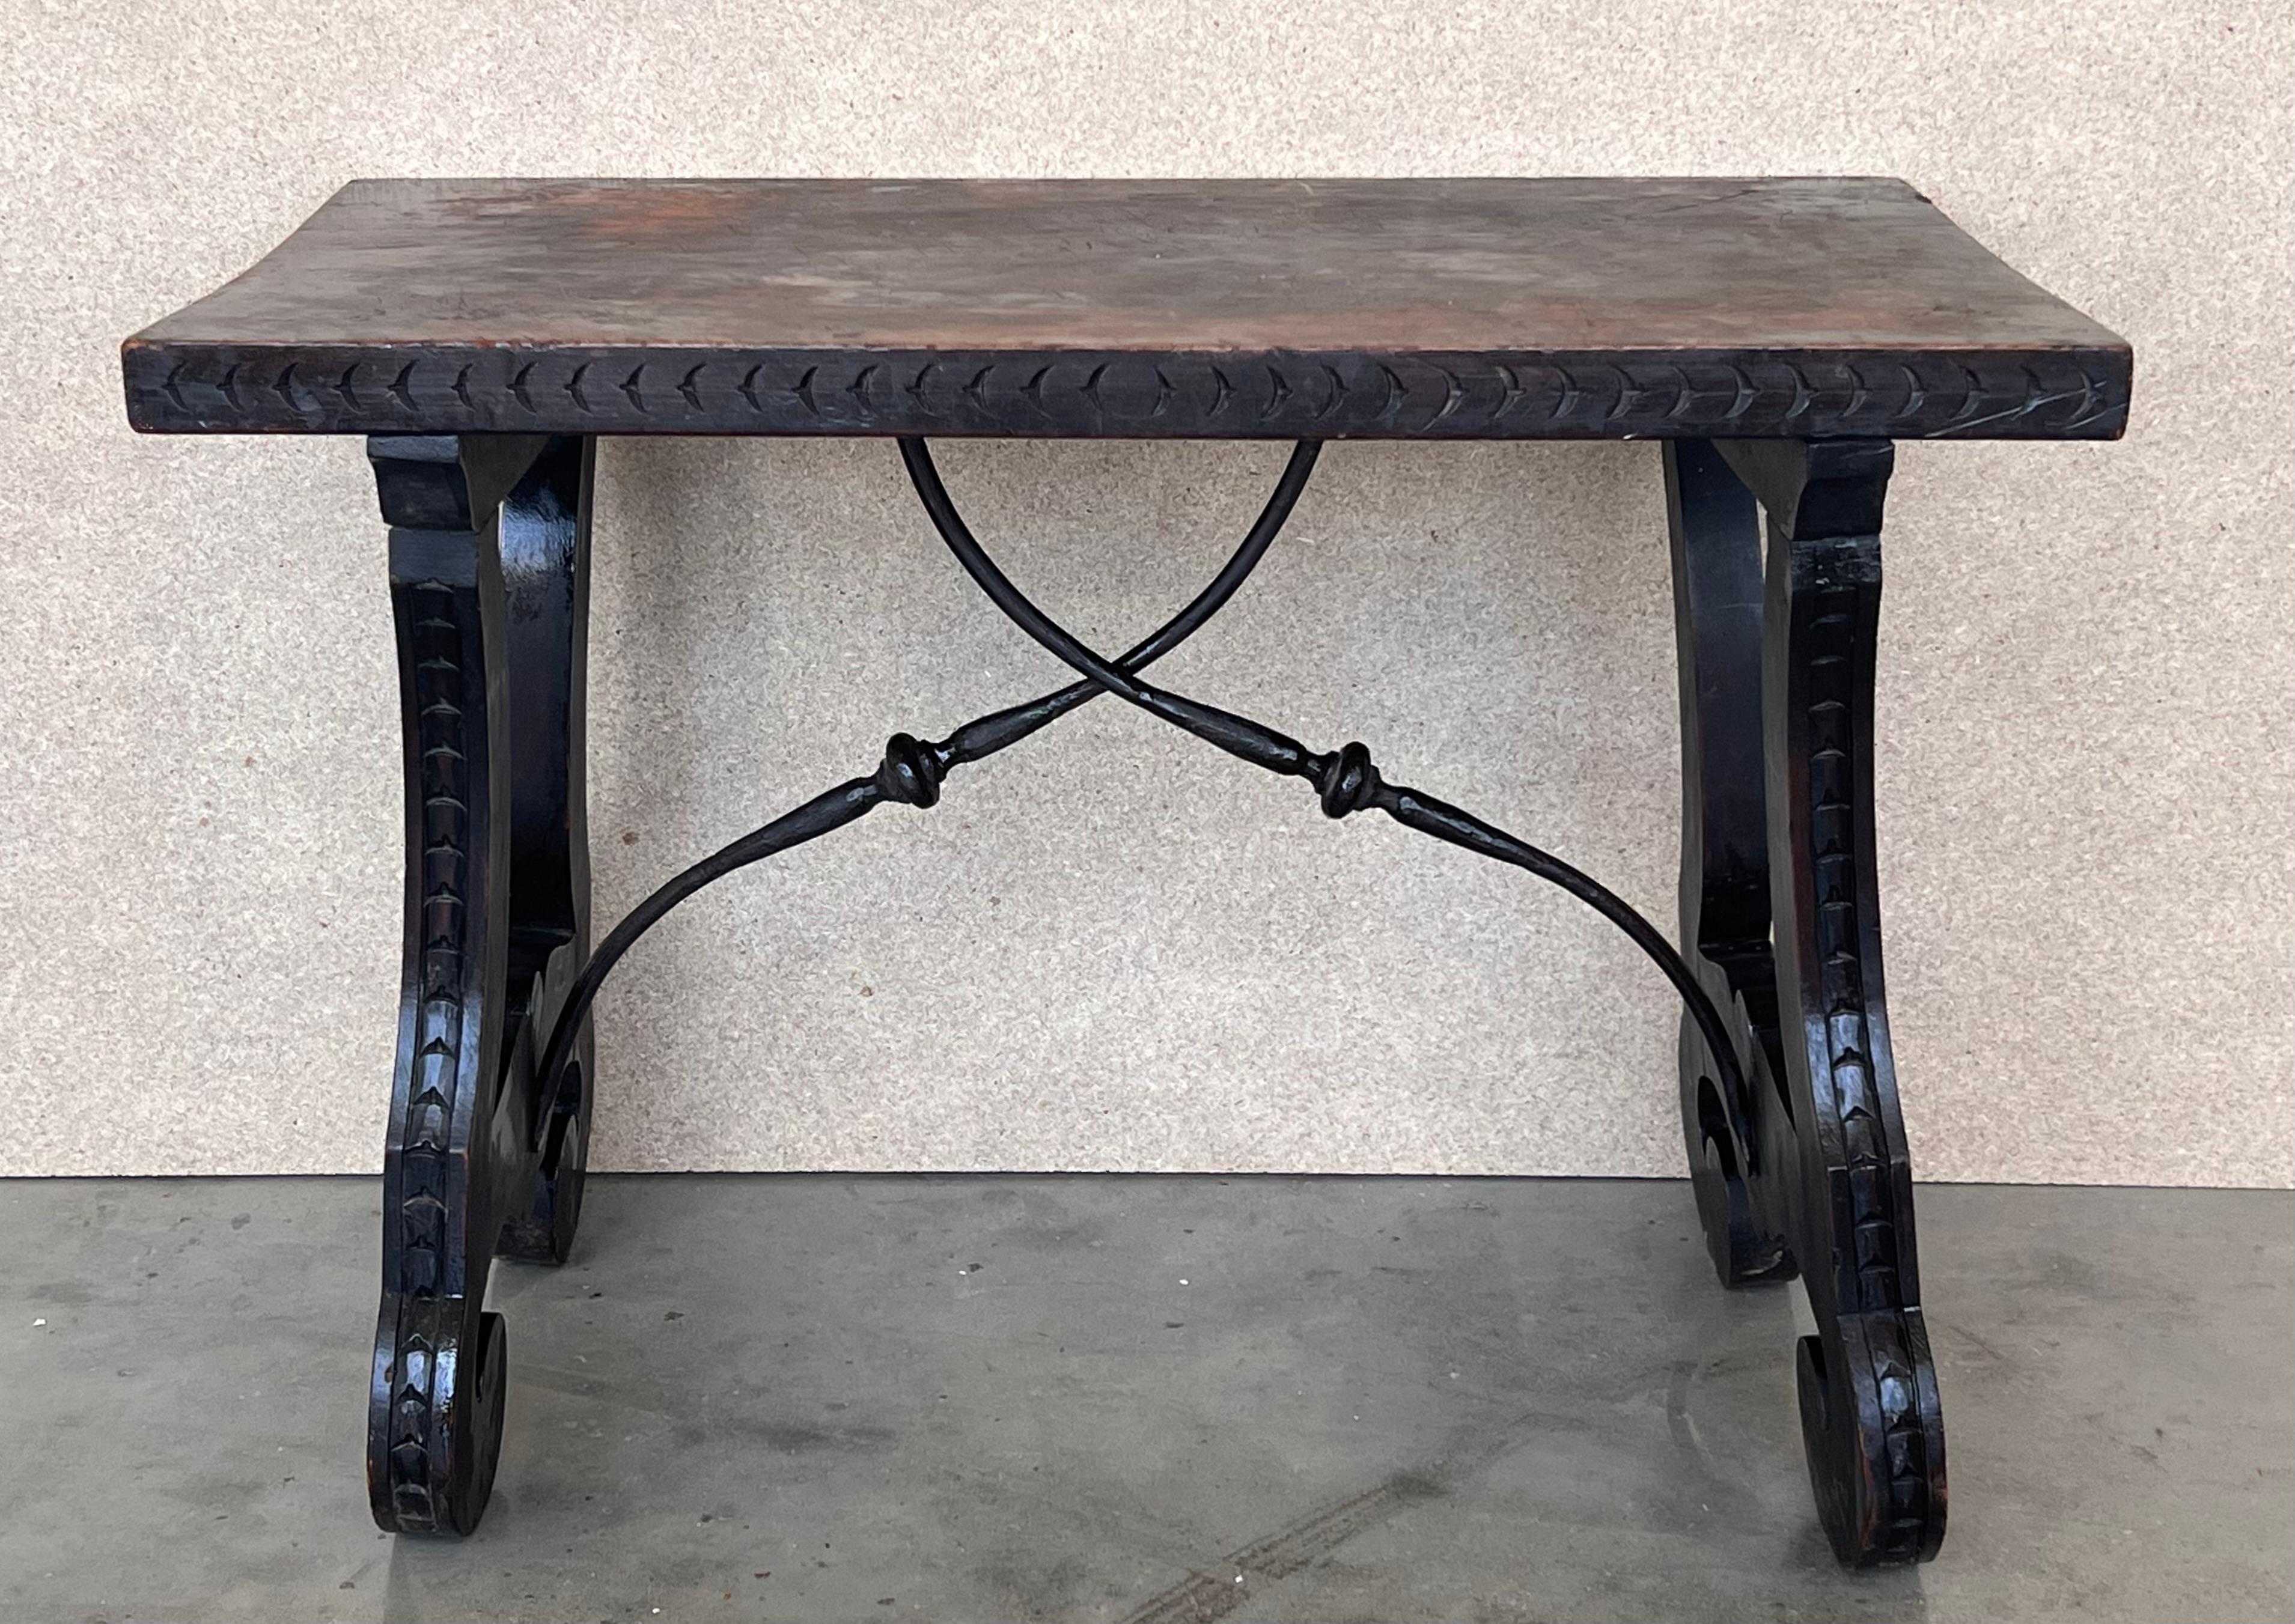 19th century Spanish trestle table in walnut. This piece has a great scale, lovely carved lyre legs and beautiful ebonized top. 
The tables has carved edges front in all sides.
This table could be used as an end table, nightstand, side table or